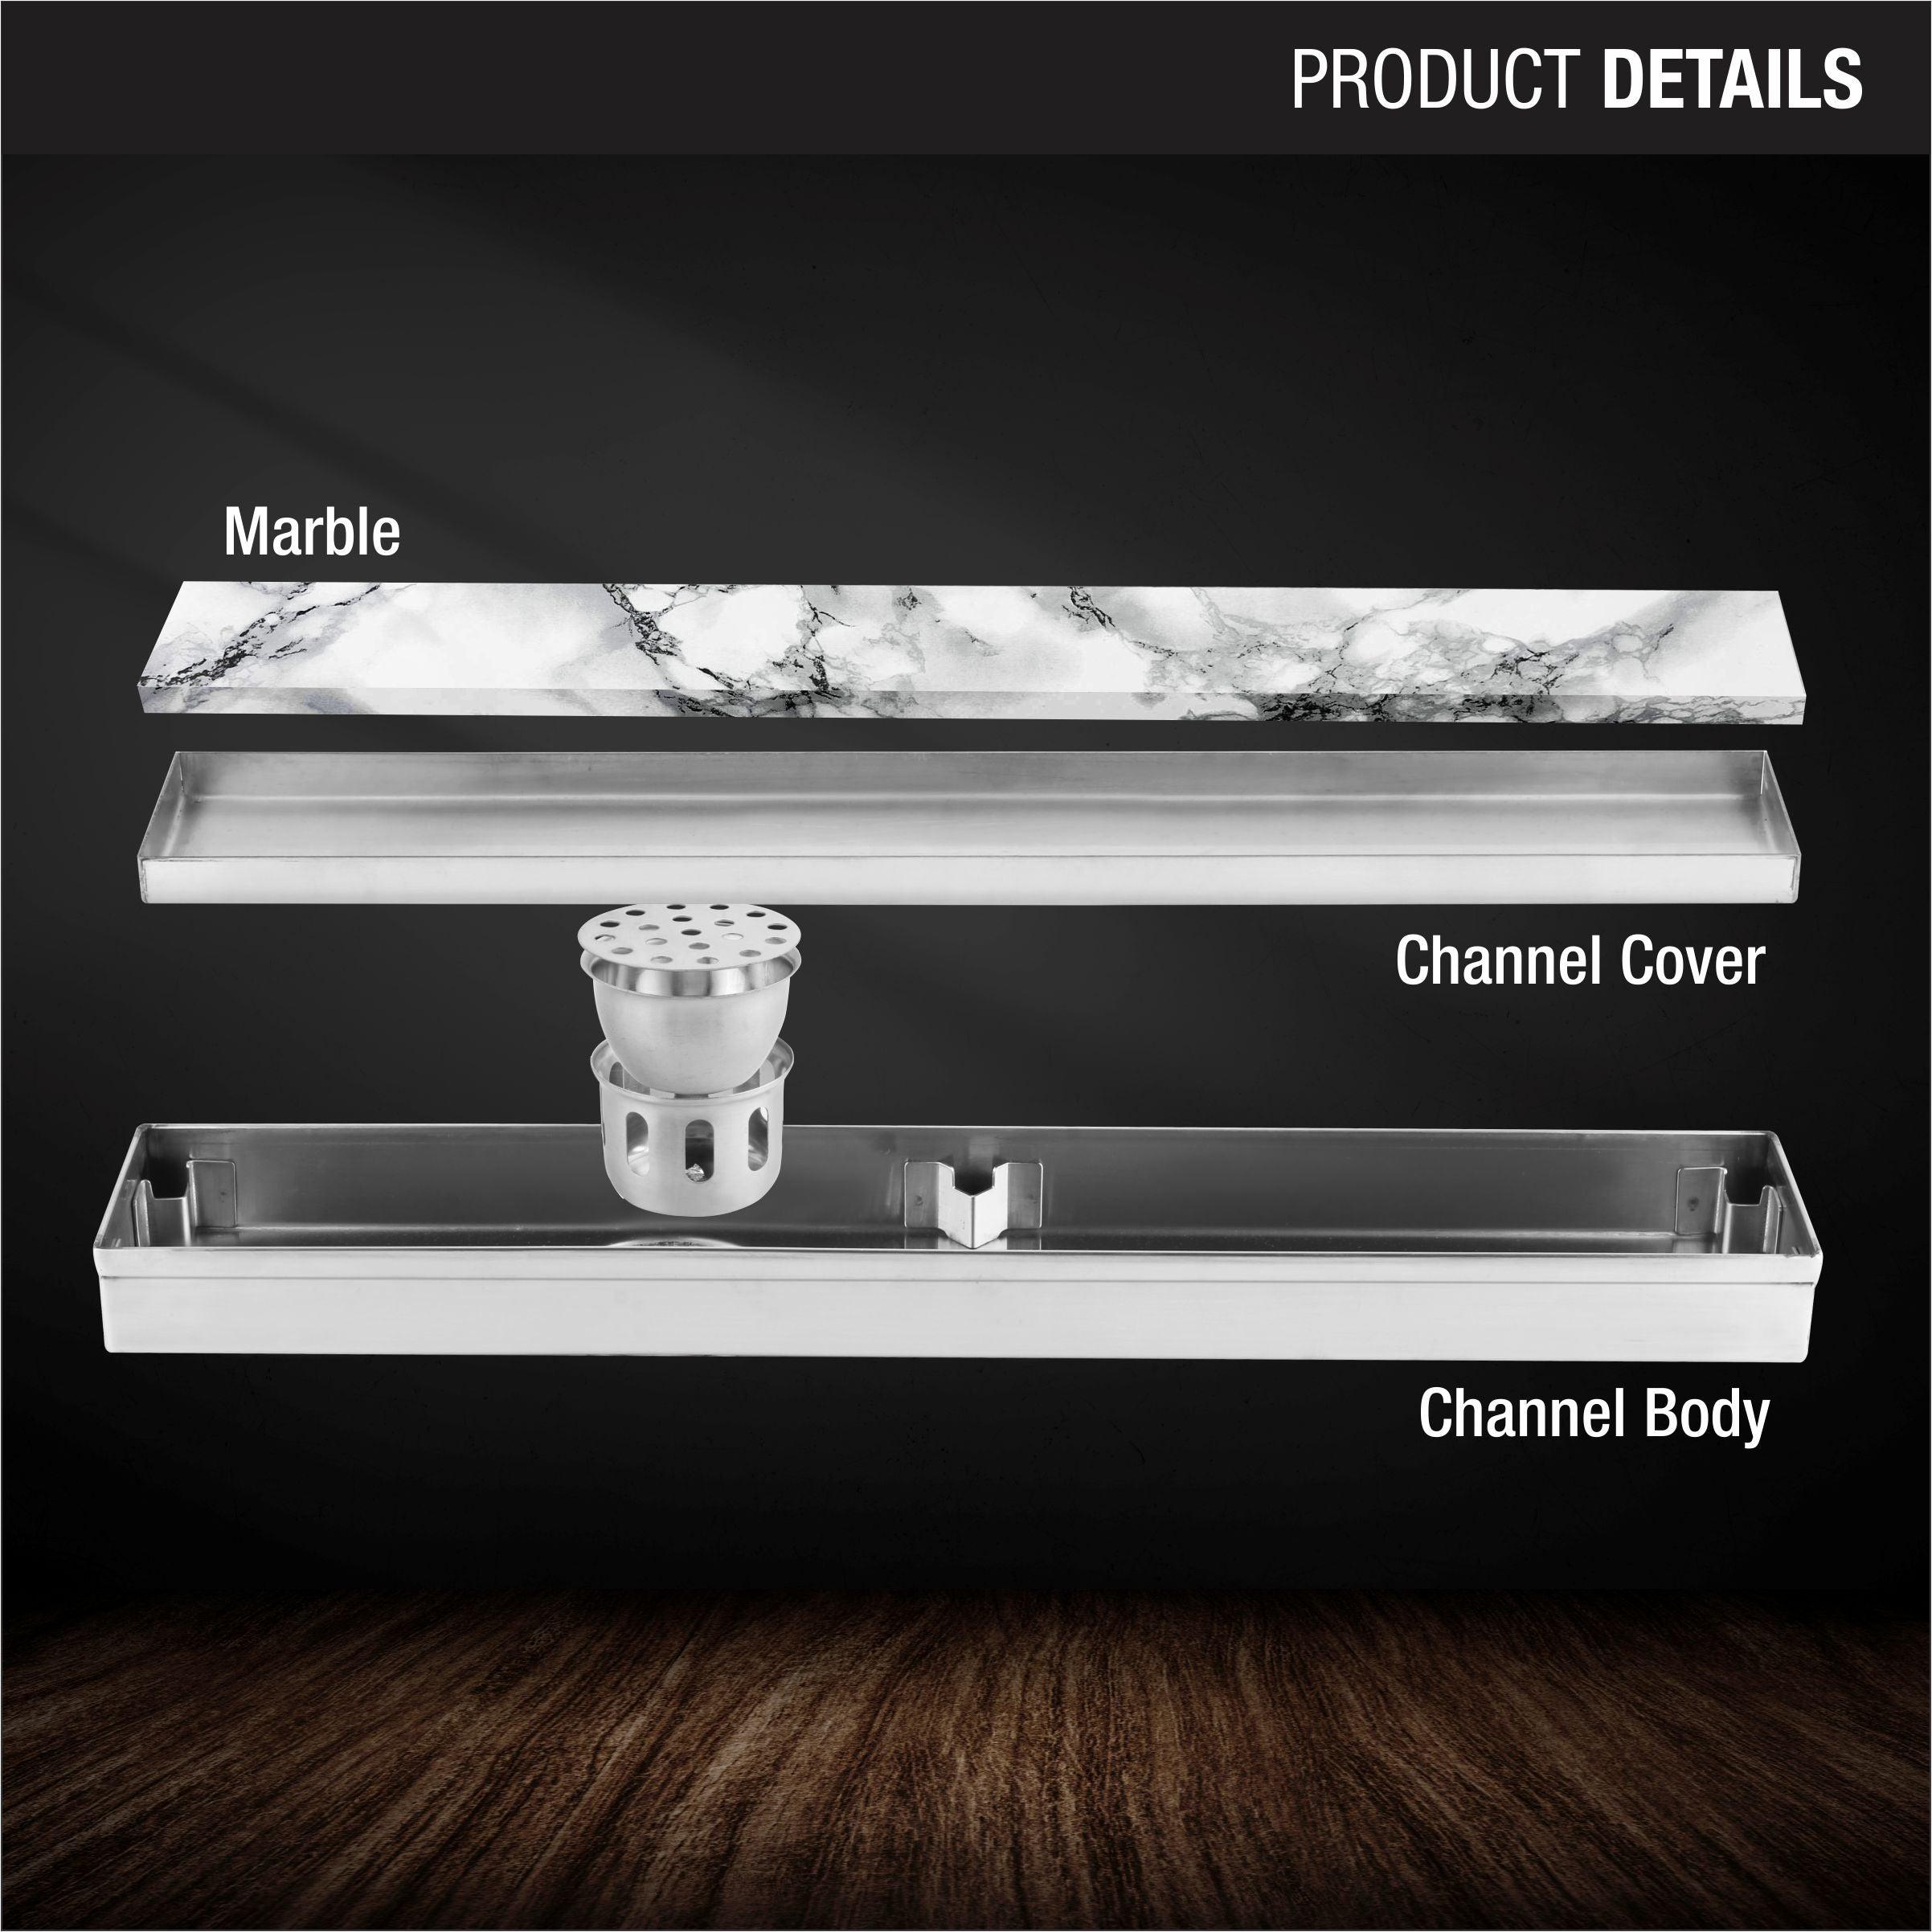 Marble Insert Shower Drain Channel (40 x 5 Inches) product details